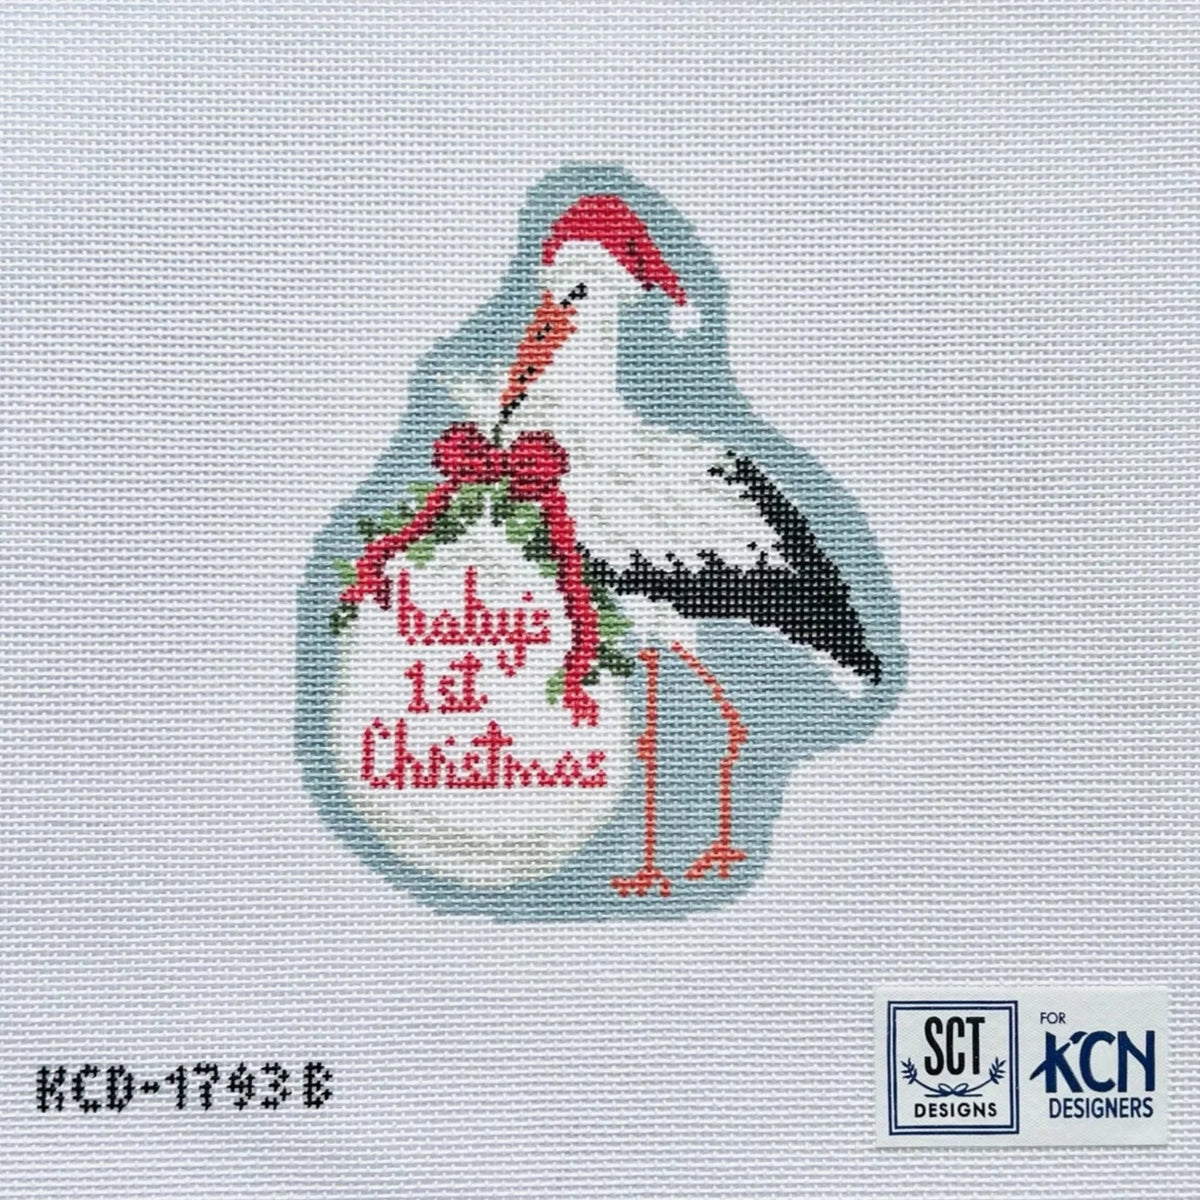 KCN Designers Baby's First Christmas Stork Needlepoint Canvas - Blue